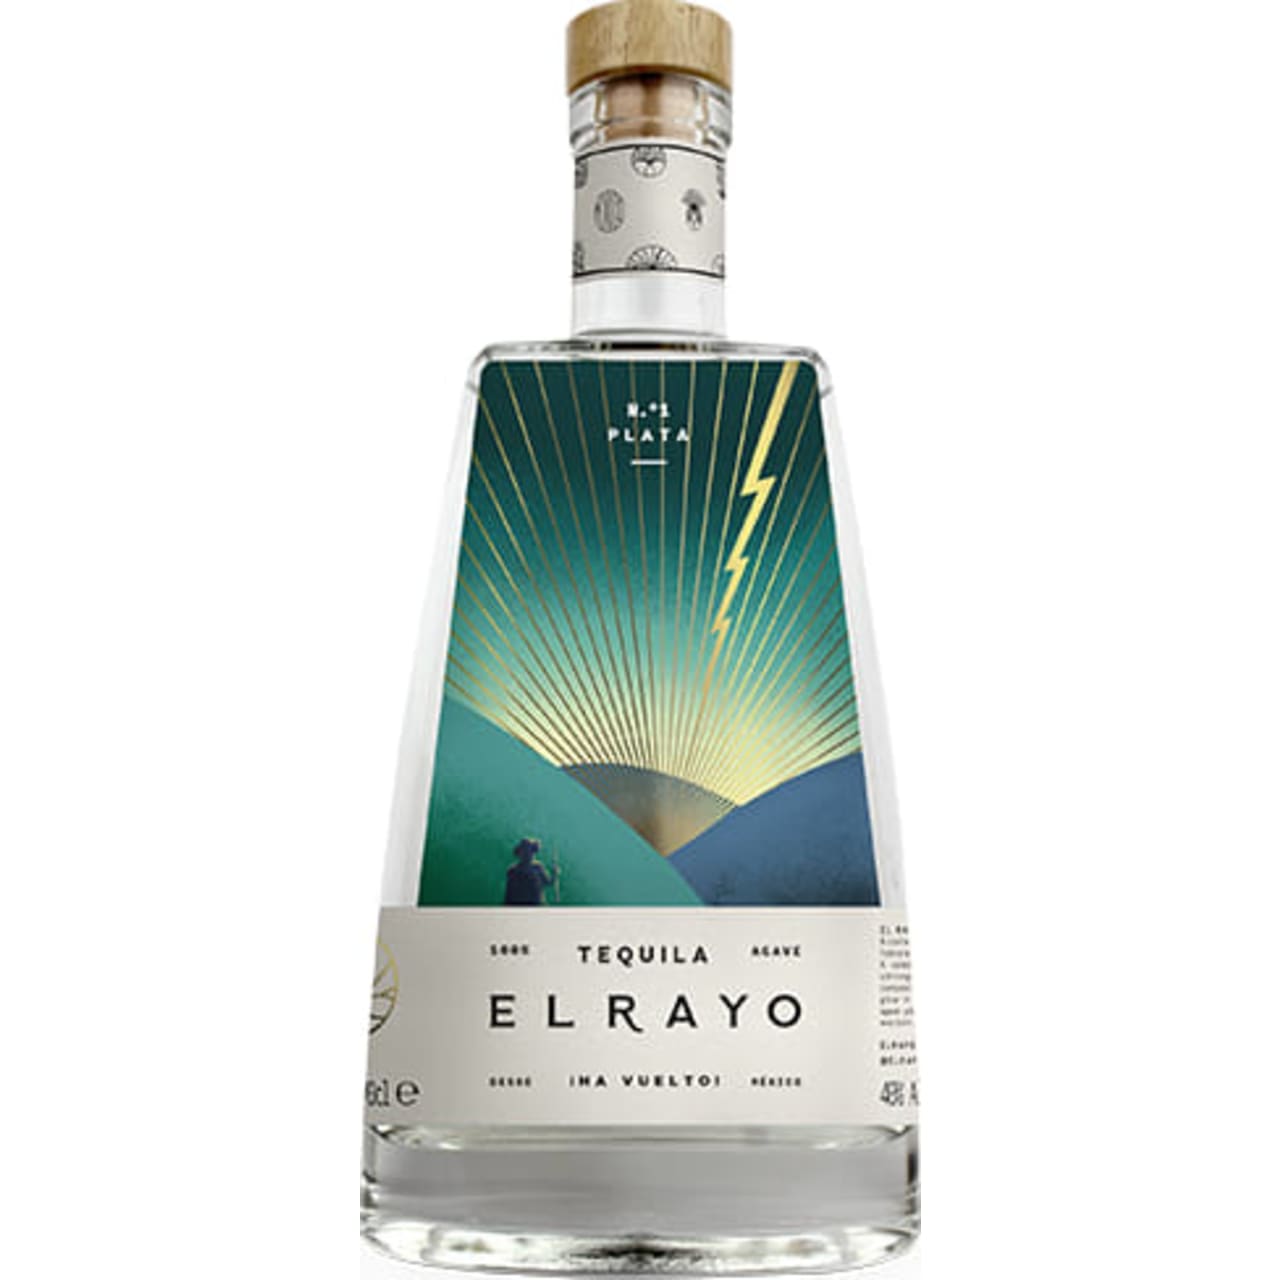 El Rayo Plata perfectly captures the vibrant flavours of Mexico’s majestic blue agave plant. Herbal aromas give way to bright citrus notes warmed by a hint of peppery spice.